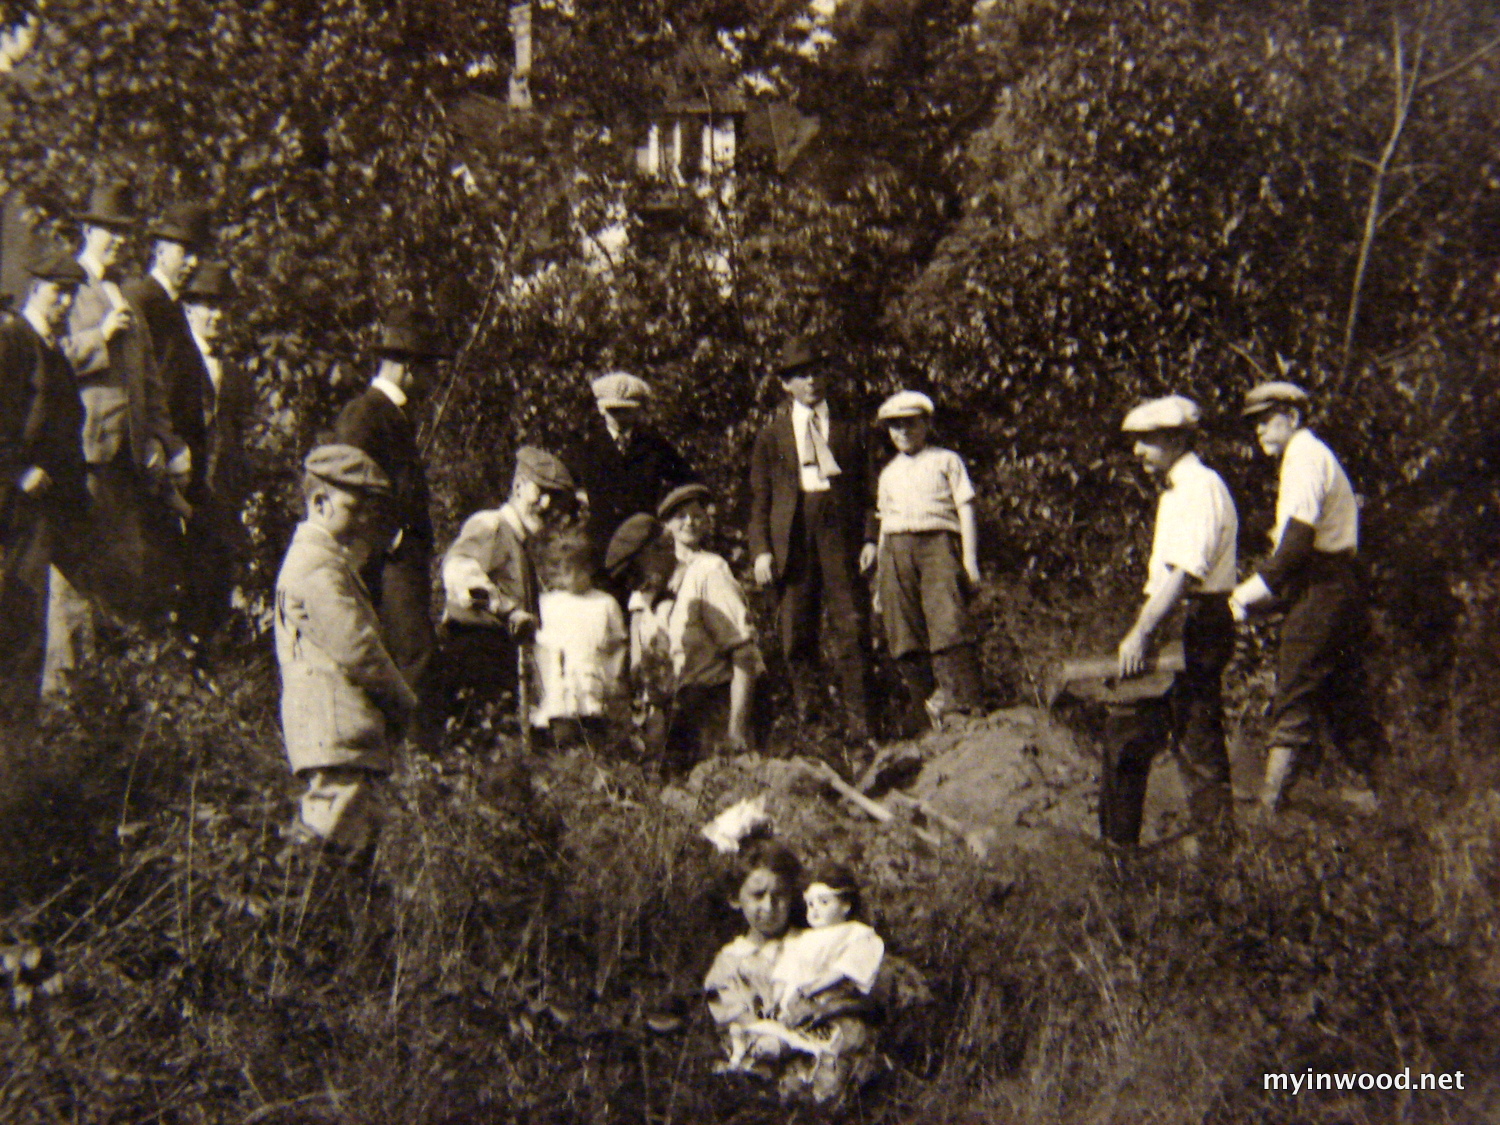 Bolton and company with children on dig near Payson Avenue, undated.